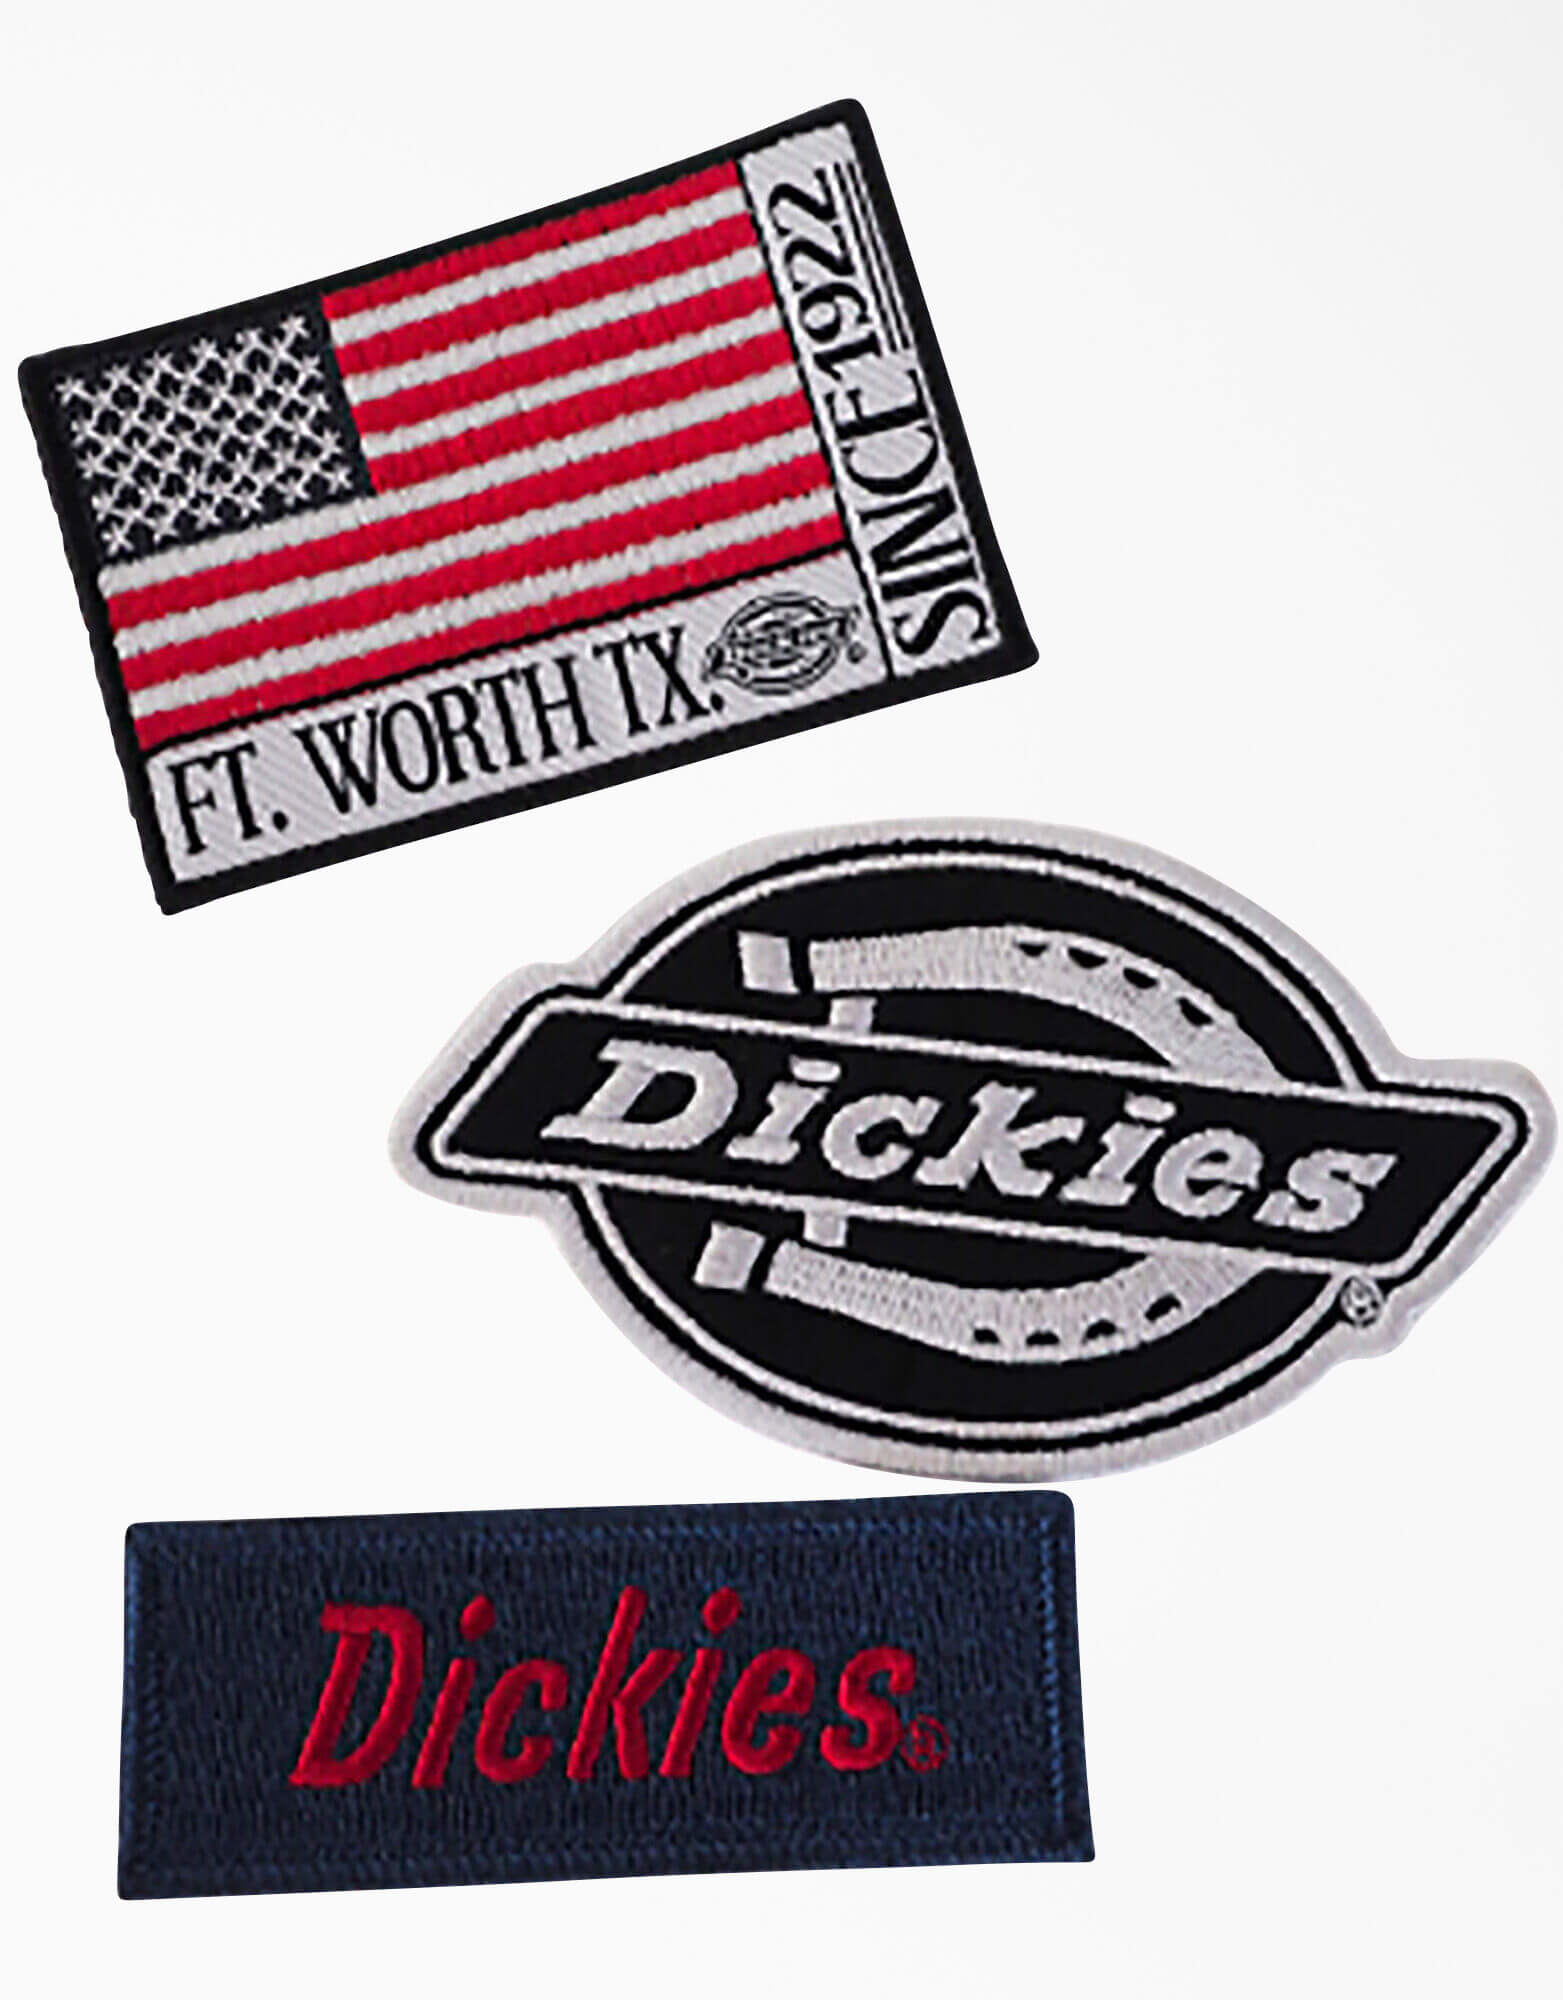 Dickies Logo Iron-on Patches, 3-Pack, Assorted Colors